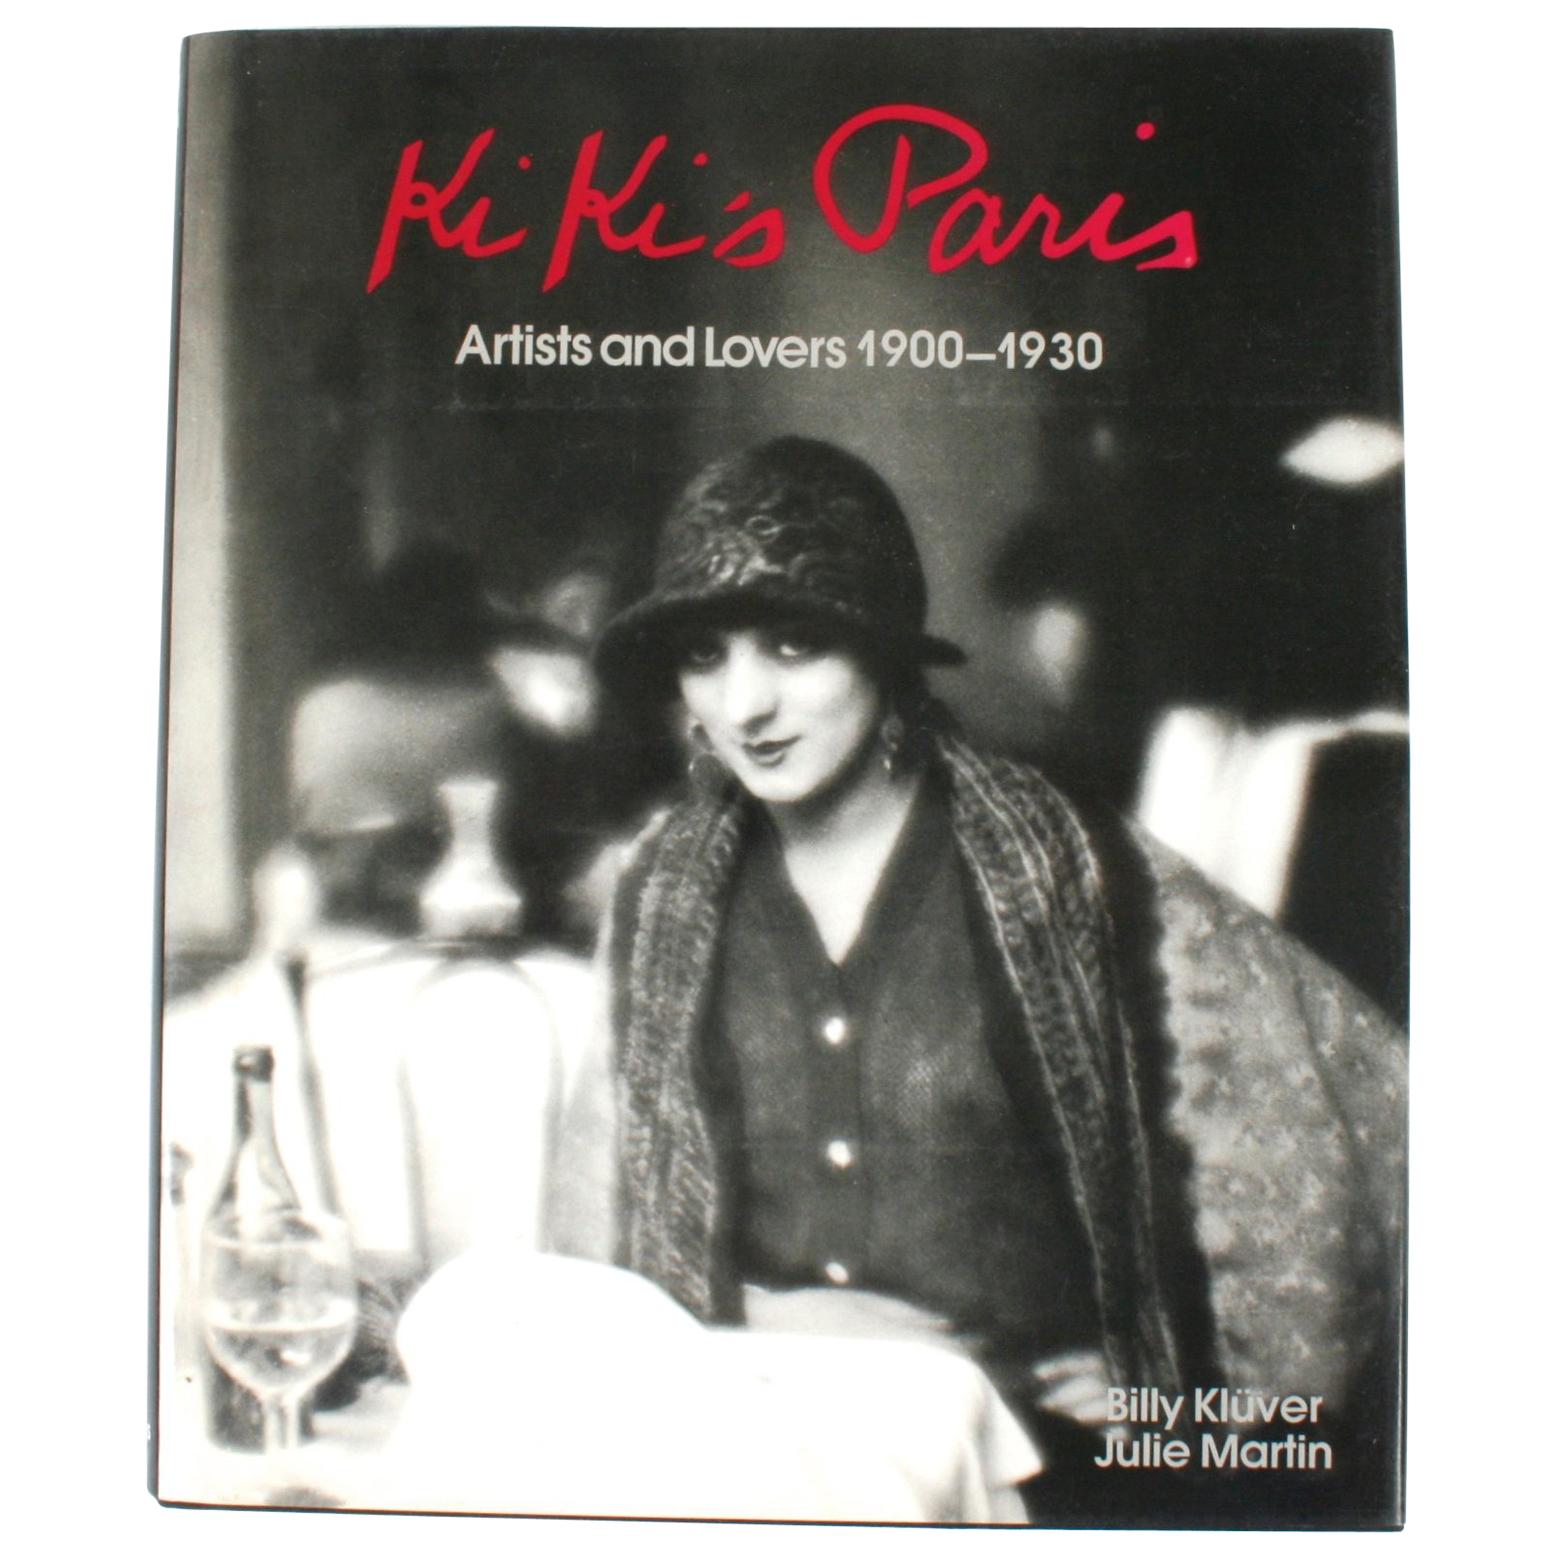 KiKi's Paris, Artist and Lovers 1900-1930, Signed by Both Authors, First Edition